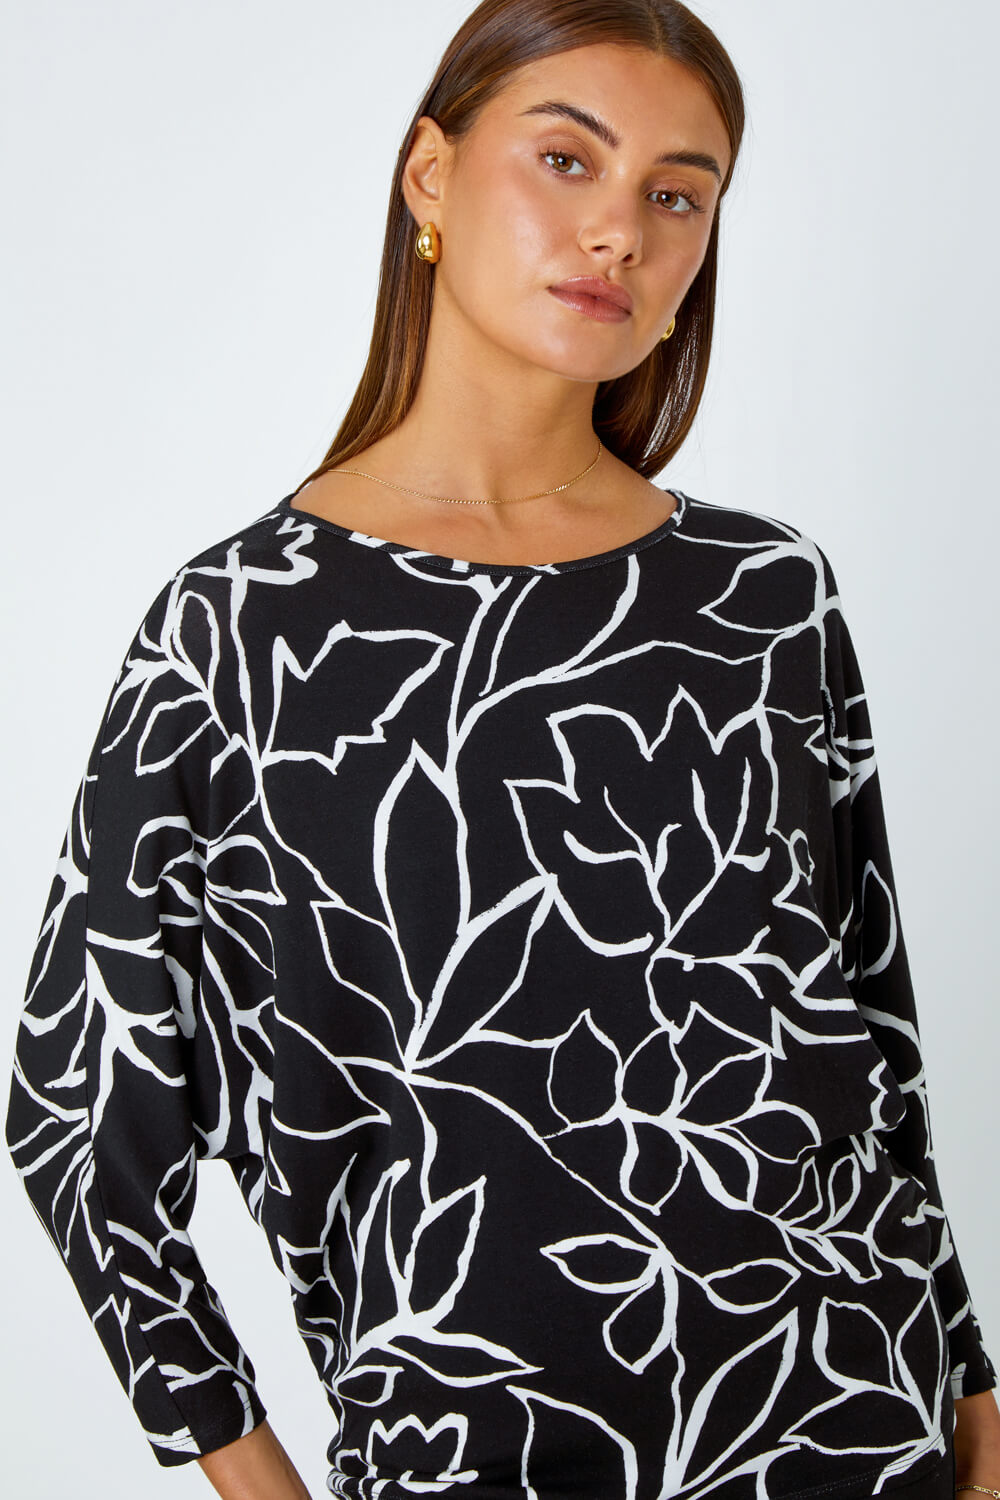 Black Contrast Floral Linear Print Stretch Top, Image 4 of 5